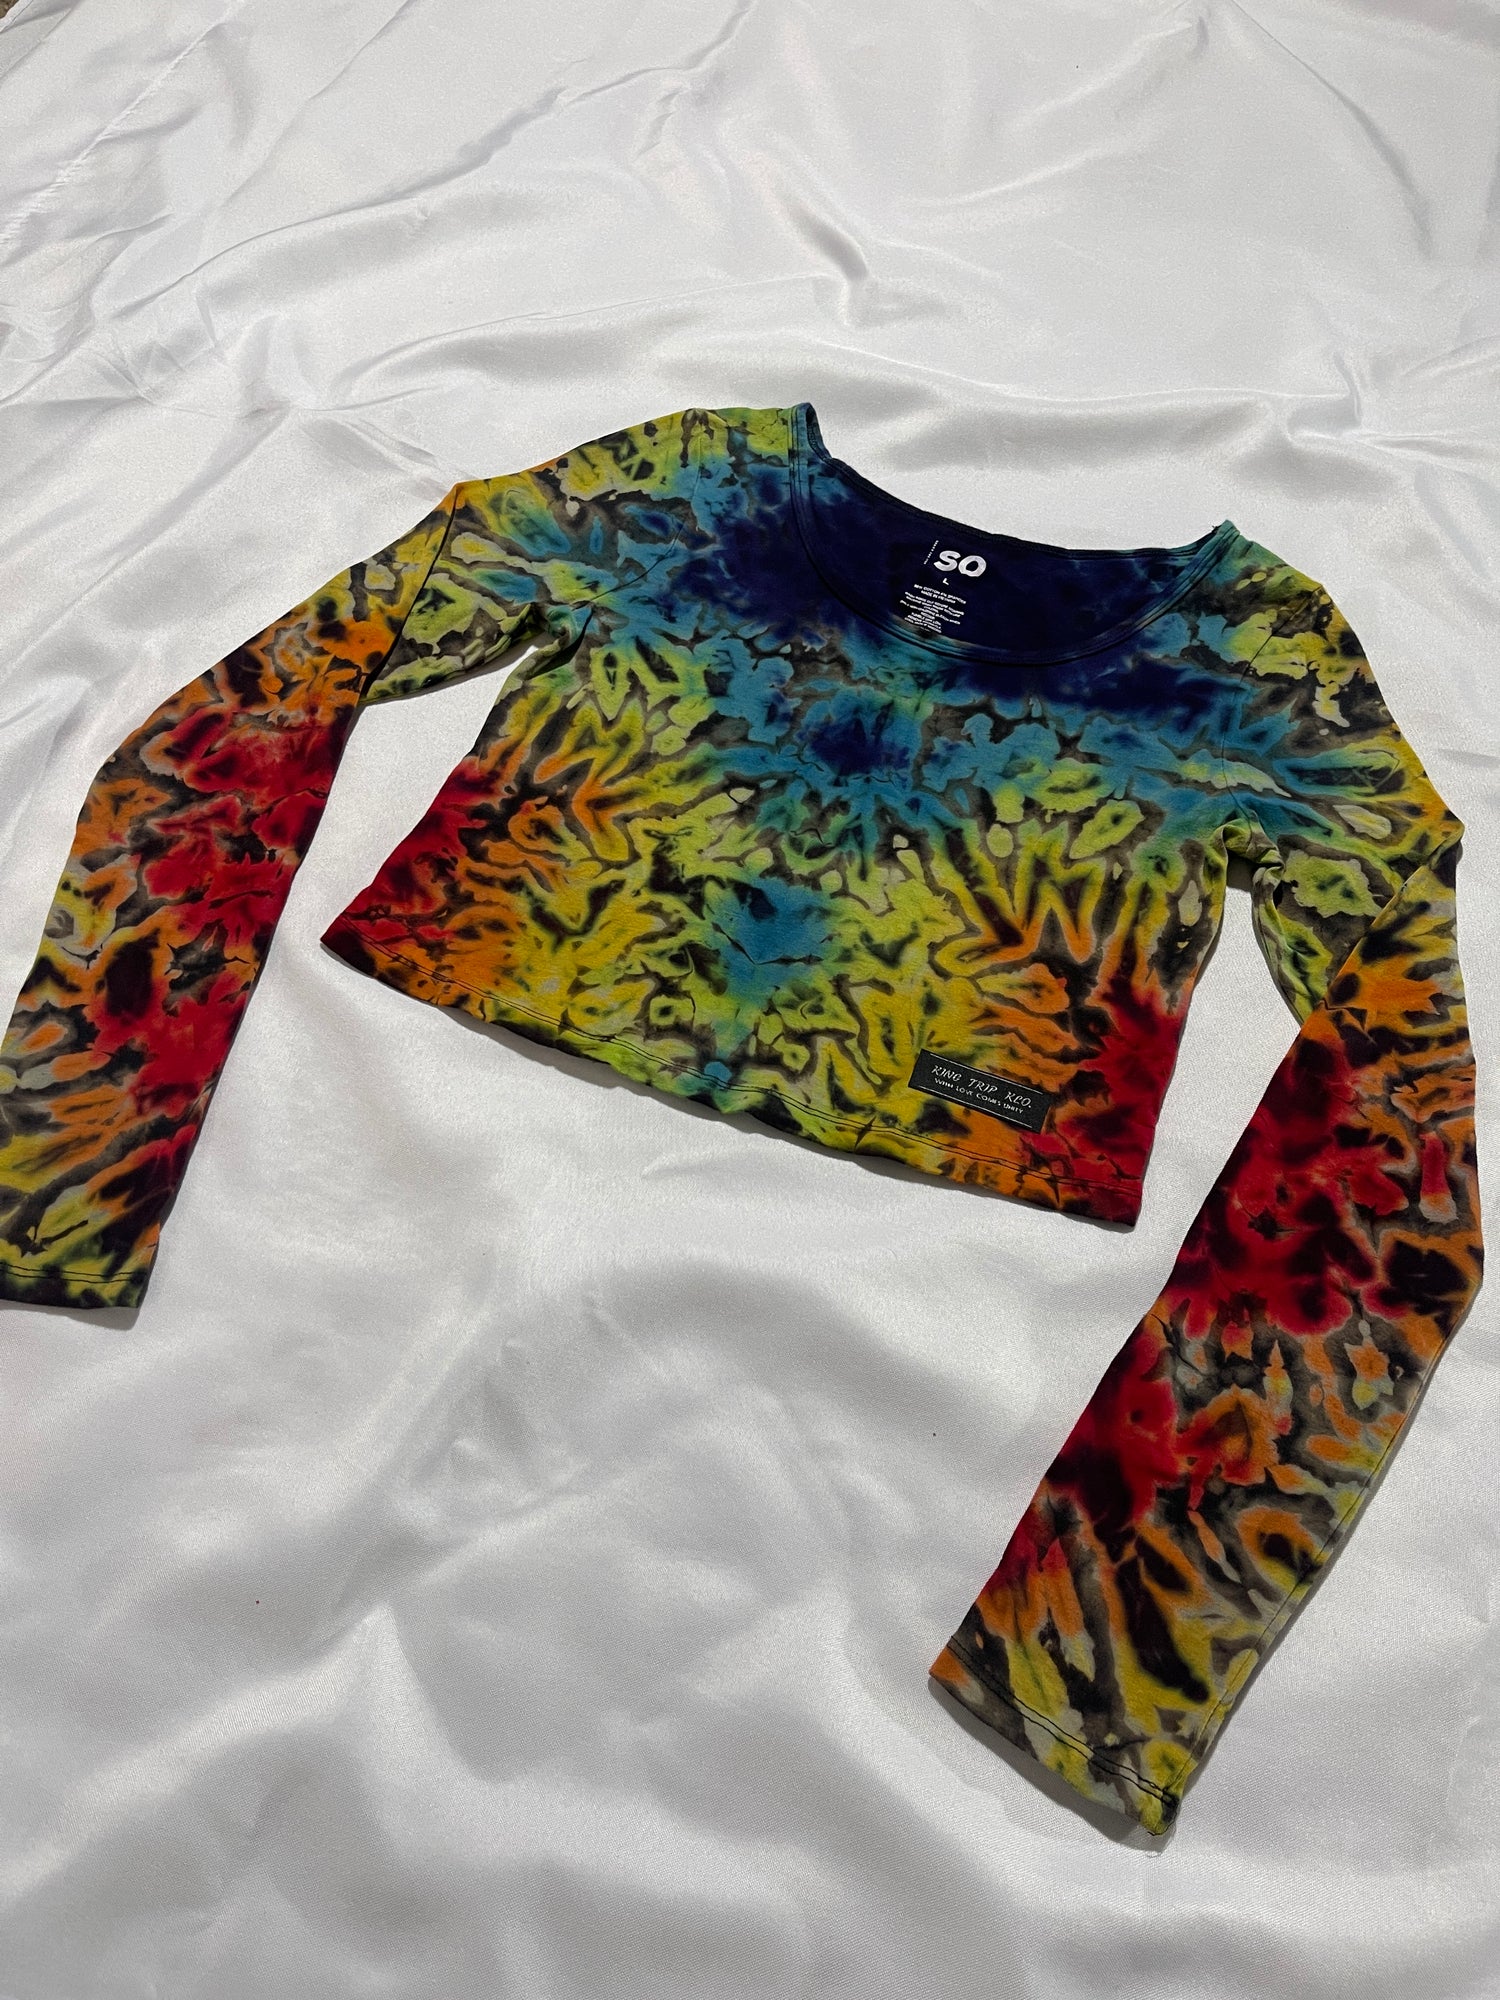 Magically Delicious Women's Long Sleeve II - LG